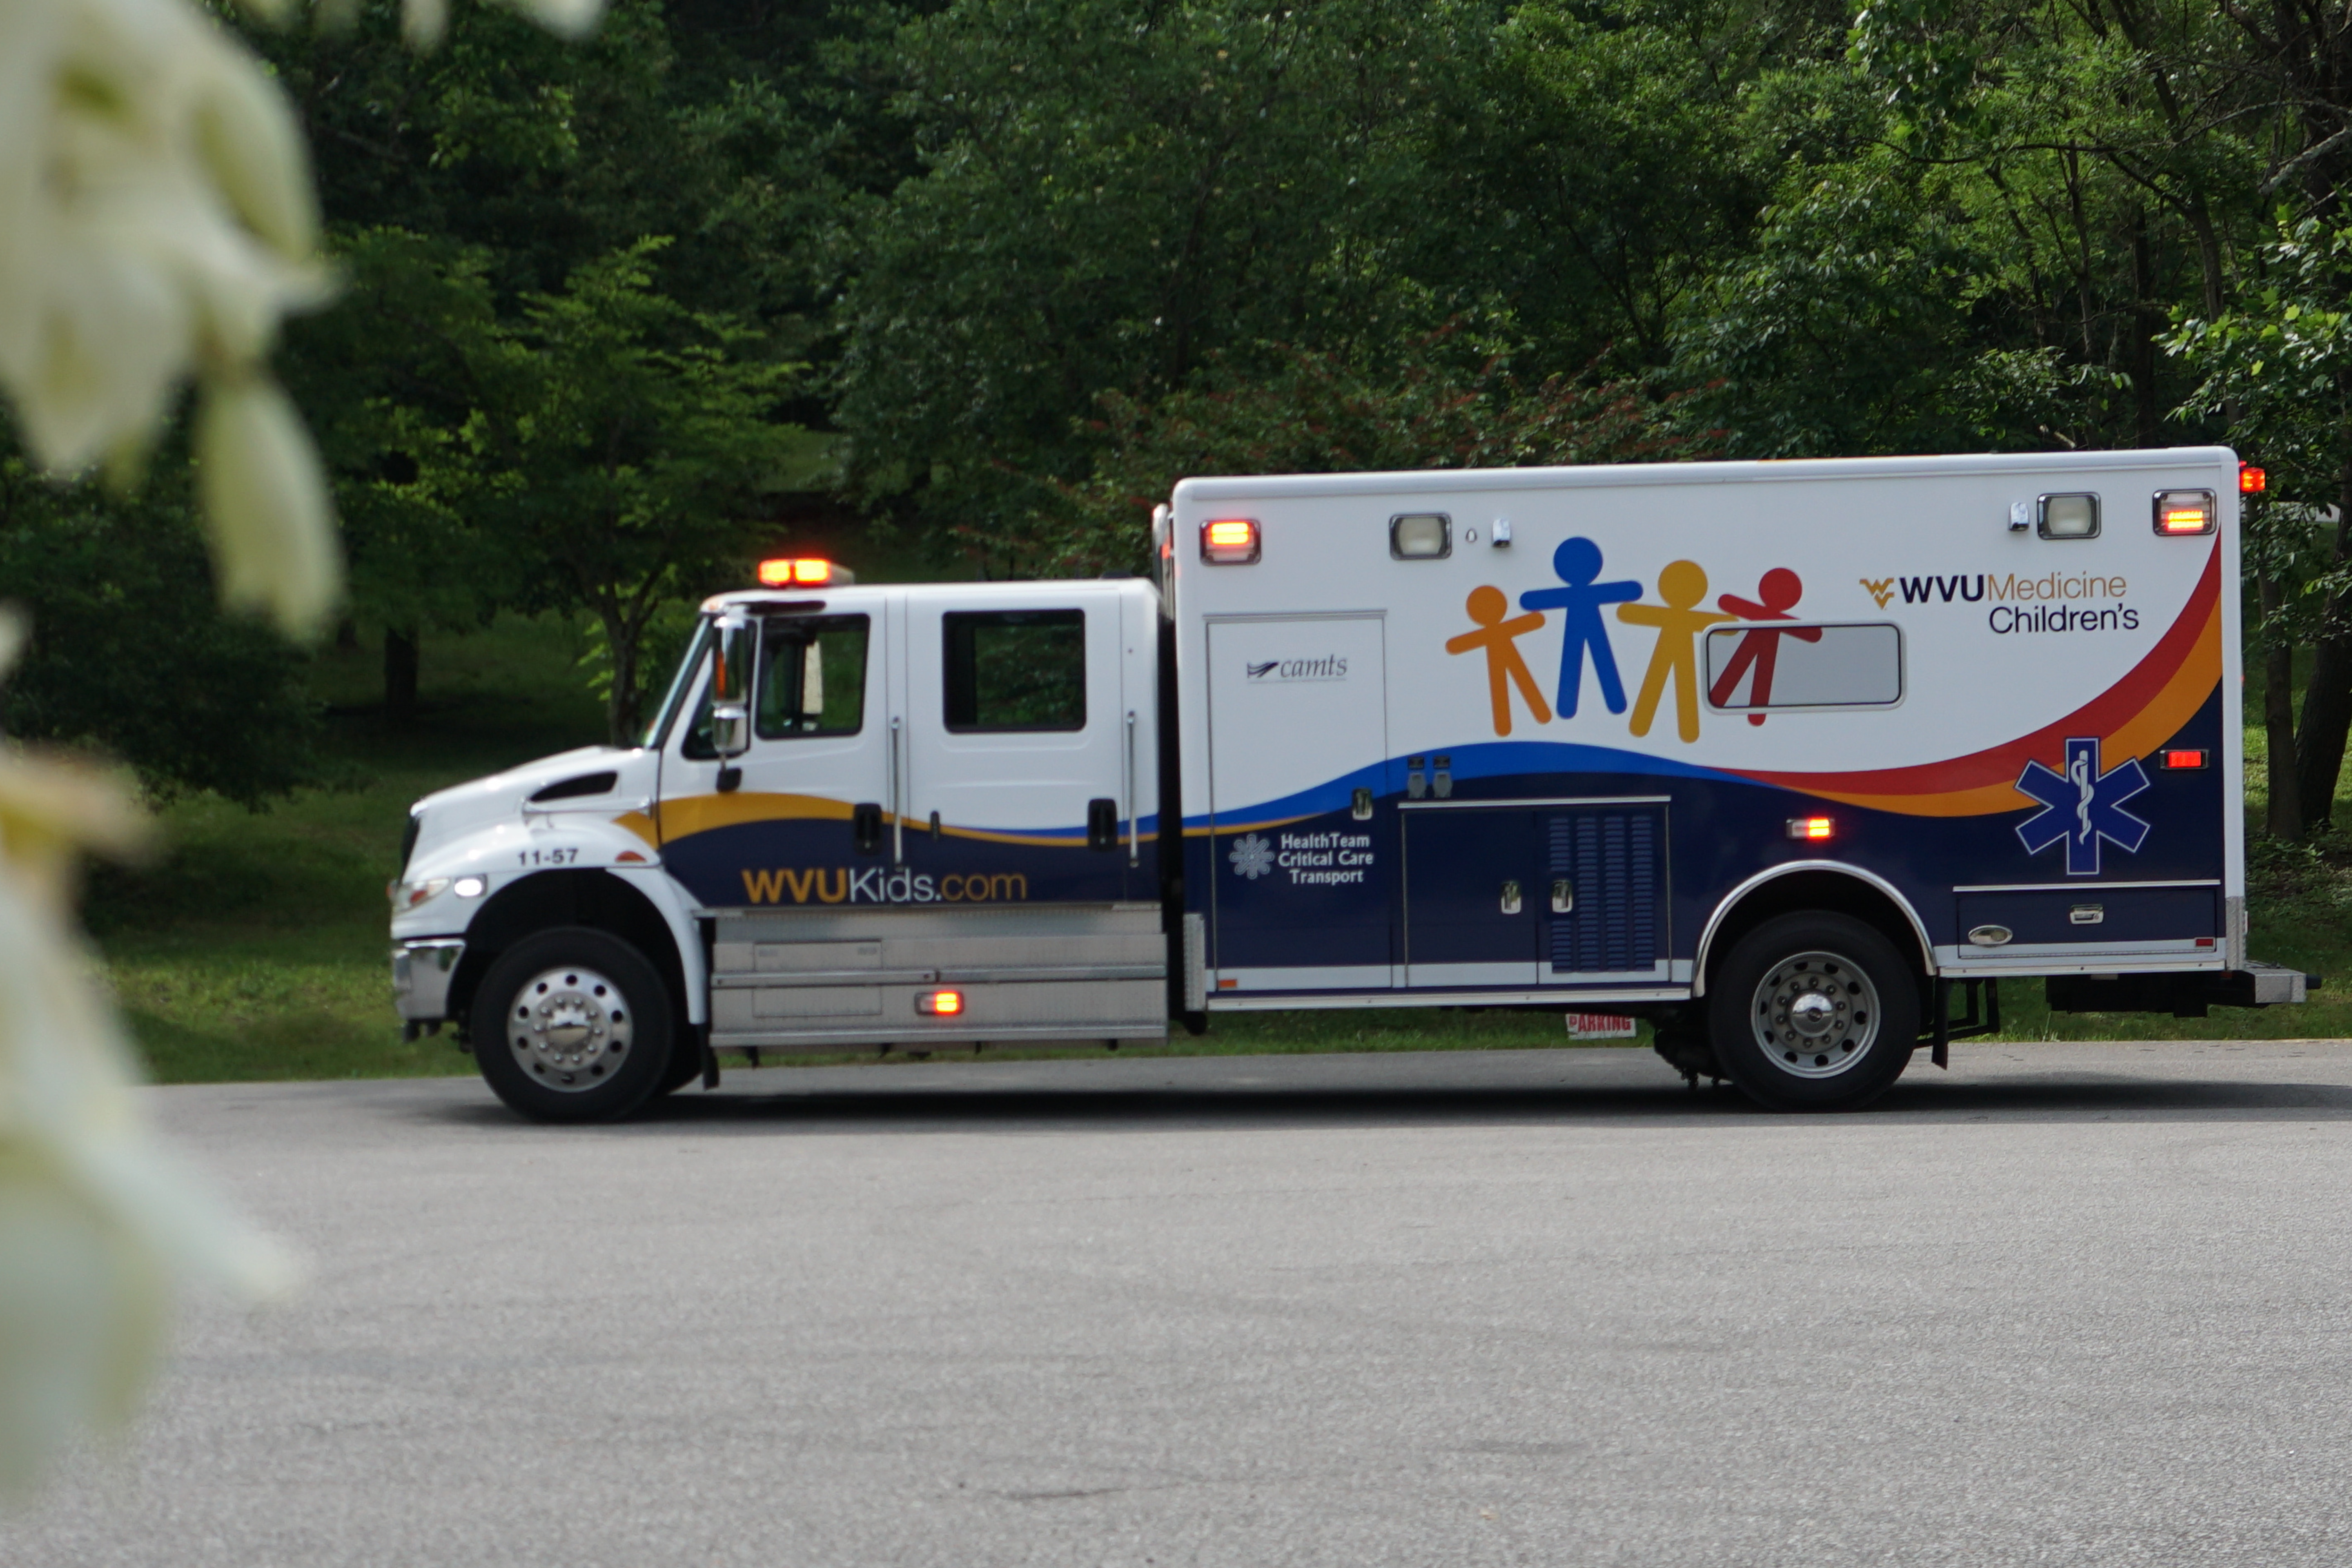 AN image of WVU Children's ambulance by HealthTeam Critical Care Transport